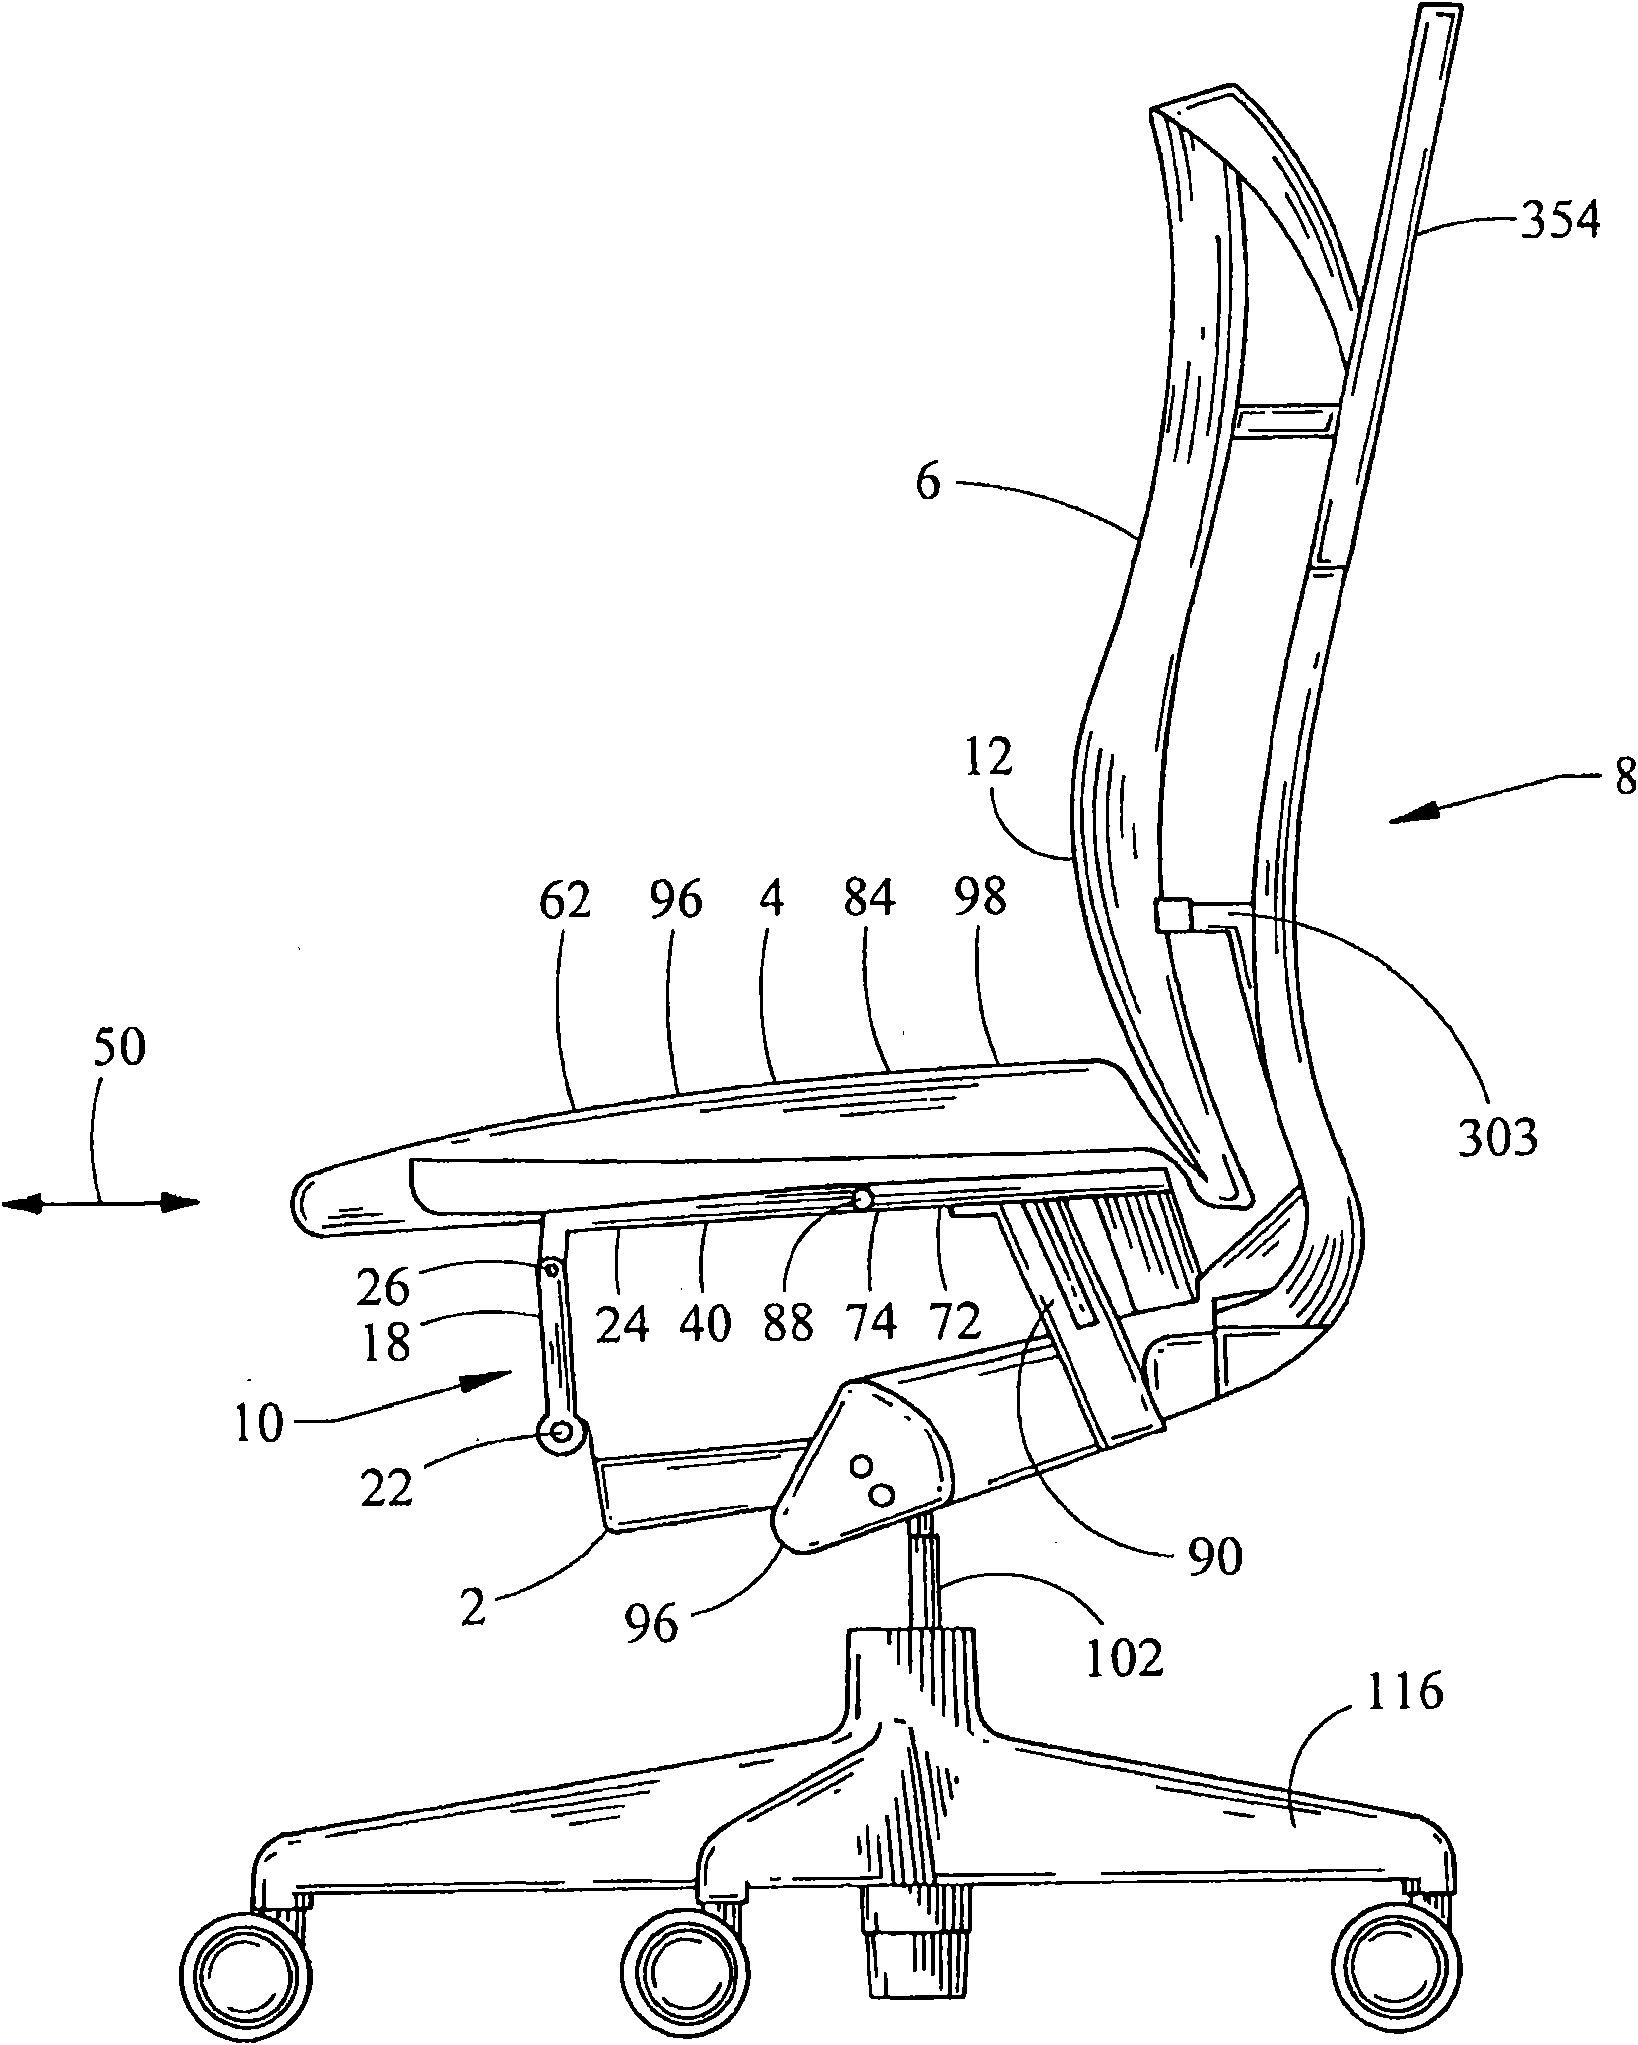 Seating structure and methods for the use thereof